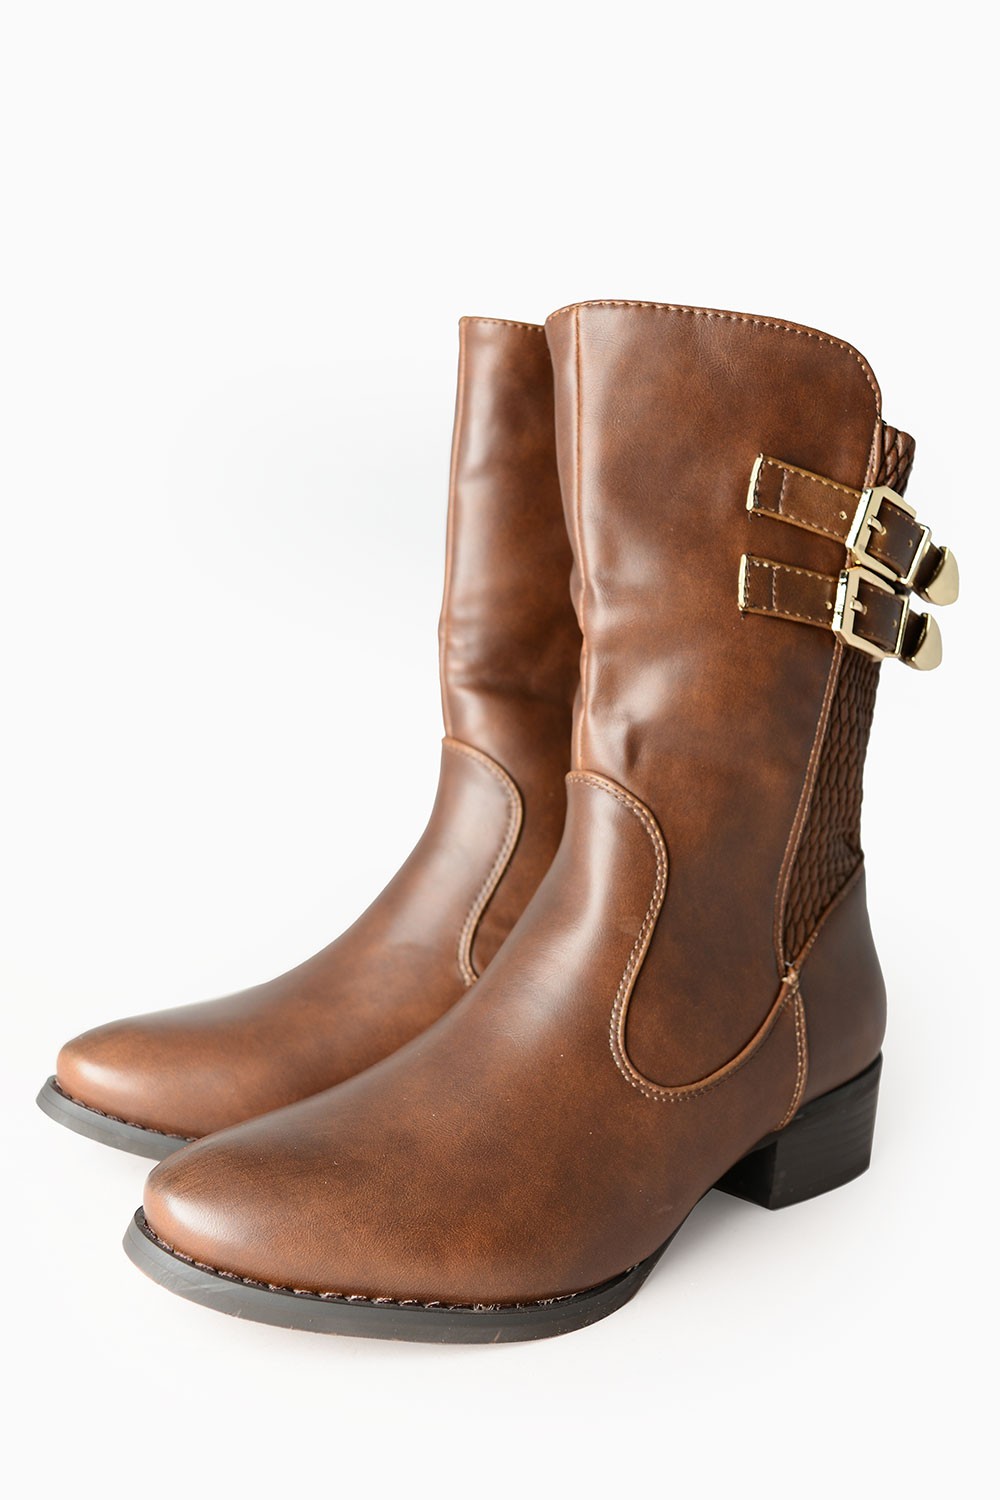 Sole City Liesl Buckle Ankle Boots in Brown | iCLOTHING